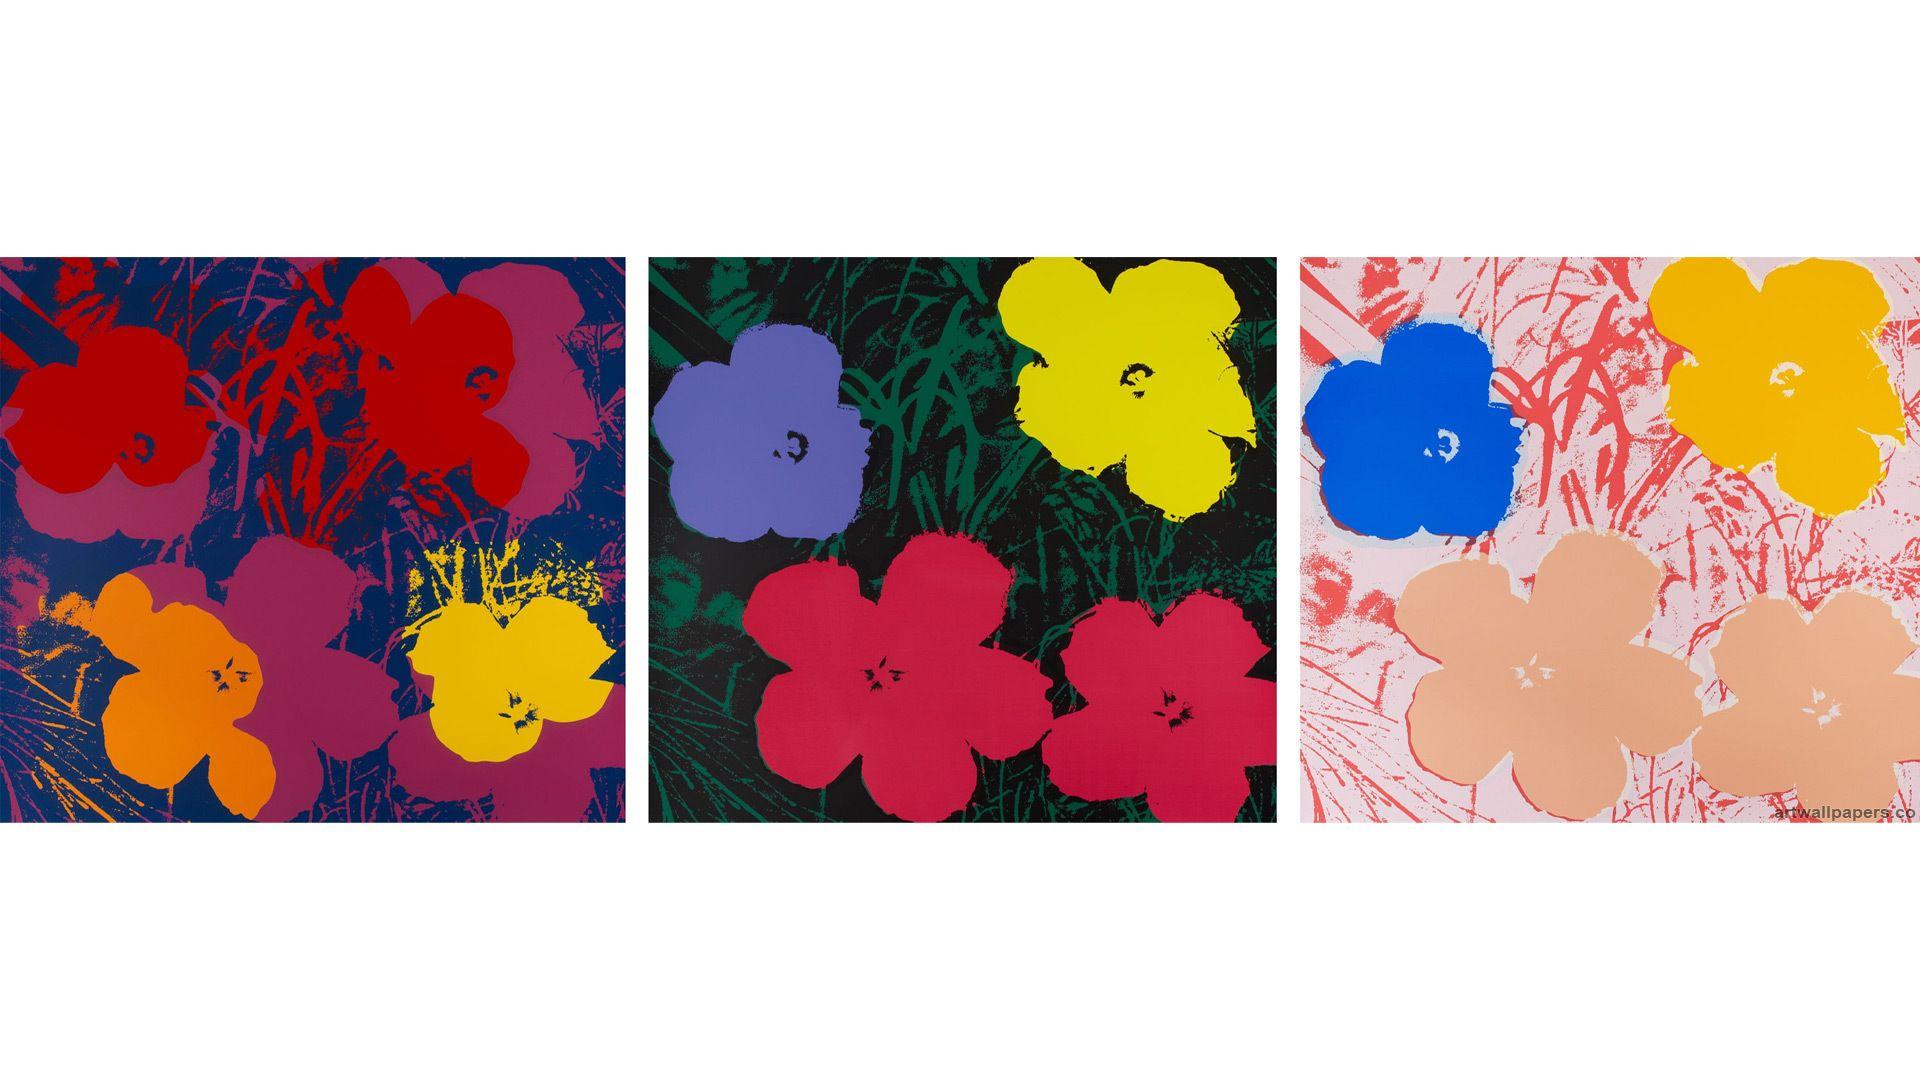 The painting of Andy Warhol Flowers wallpaper and image